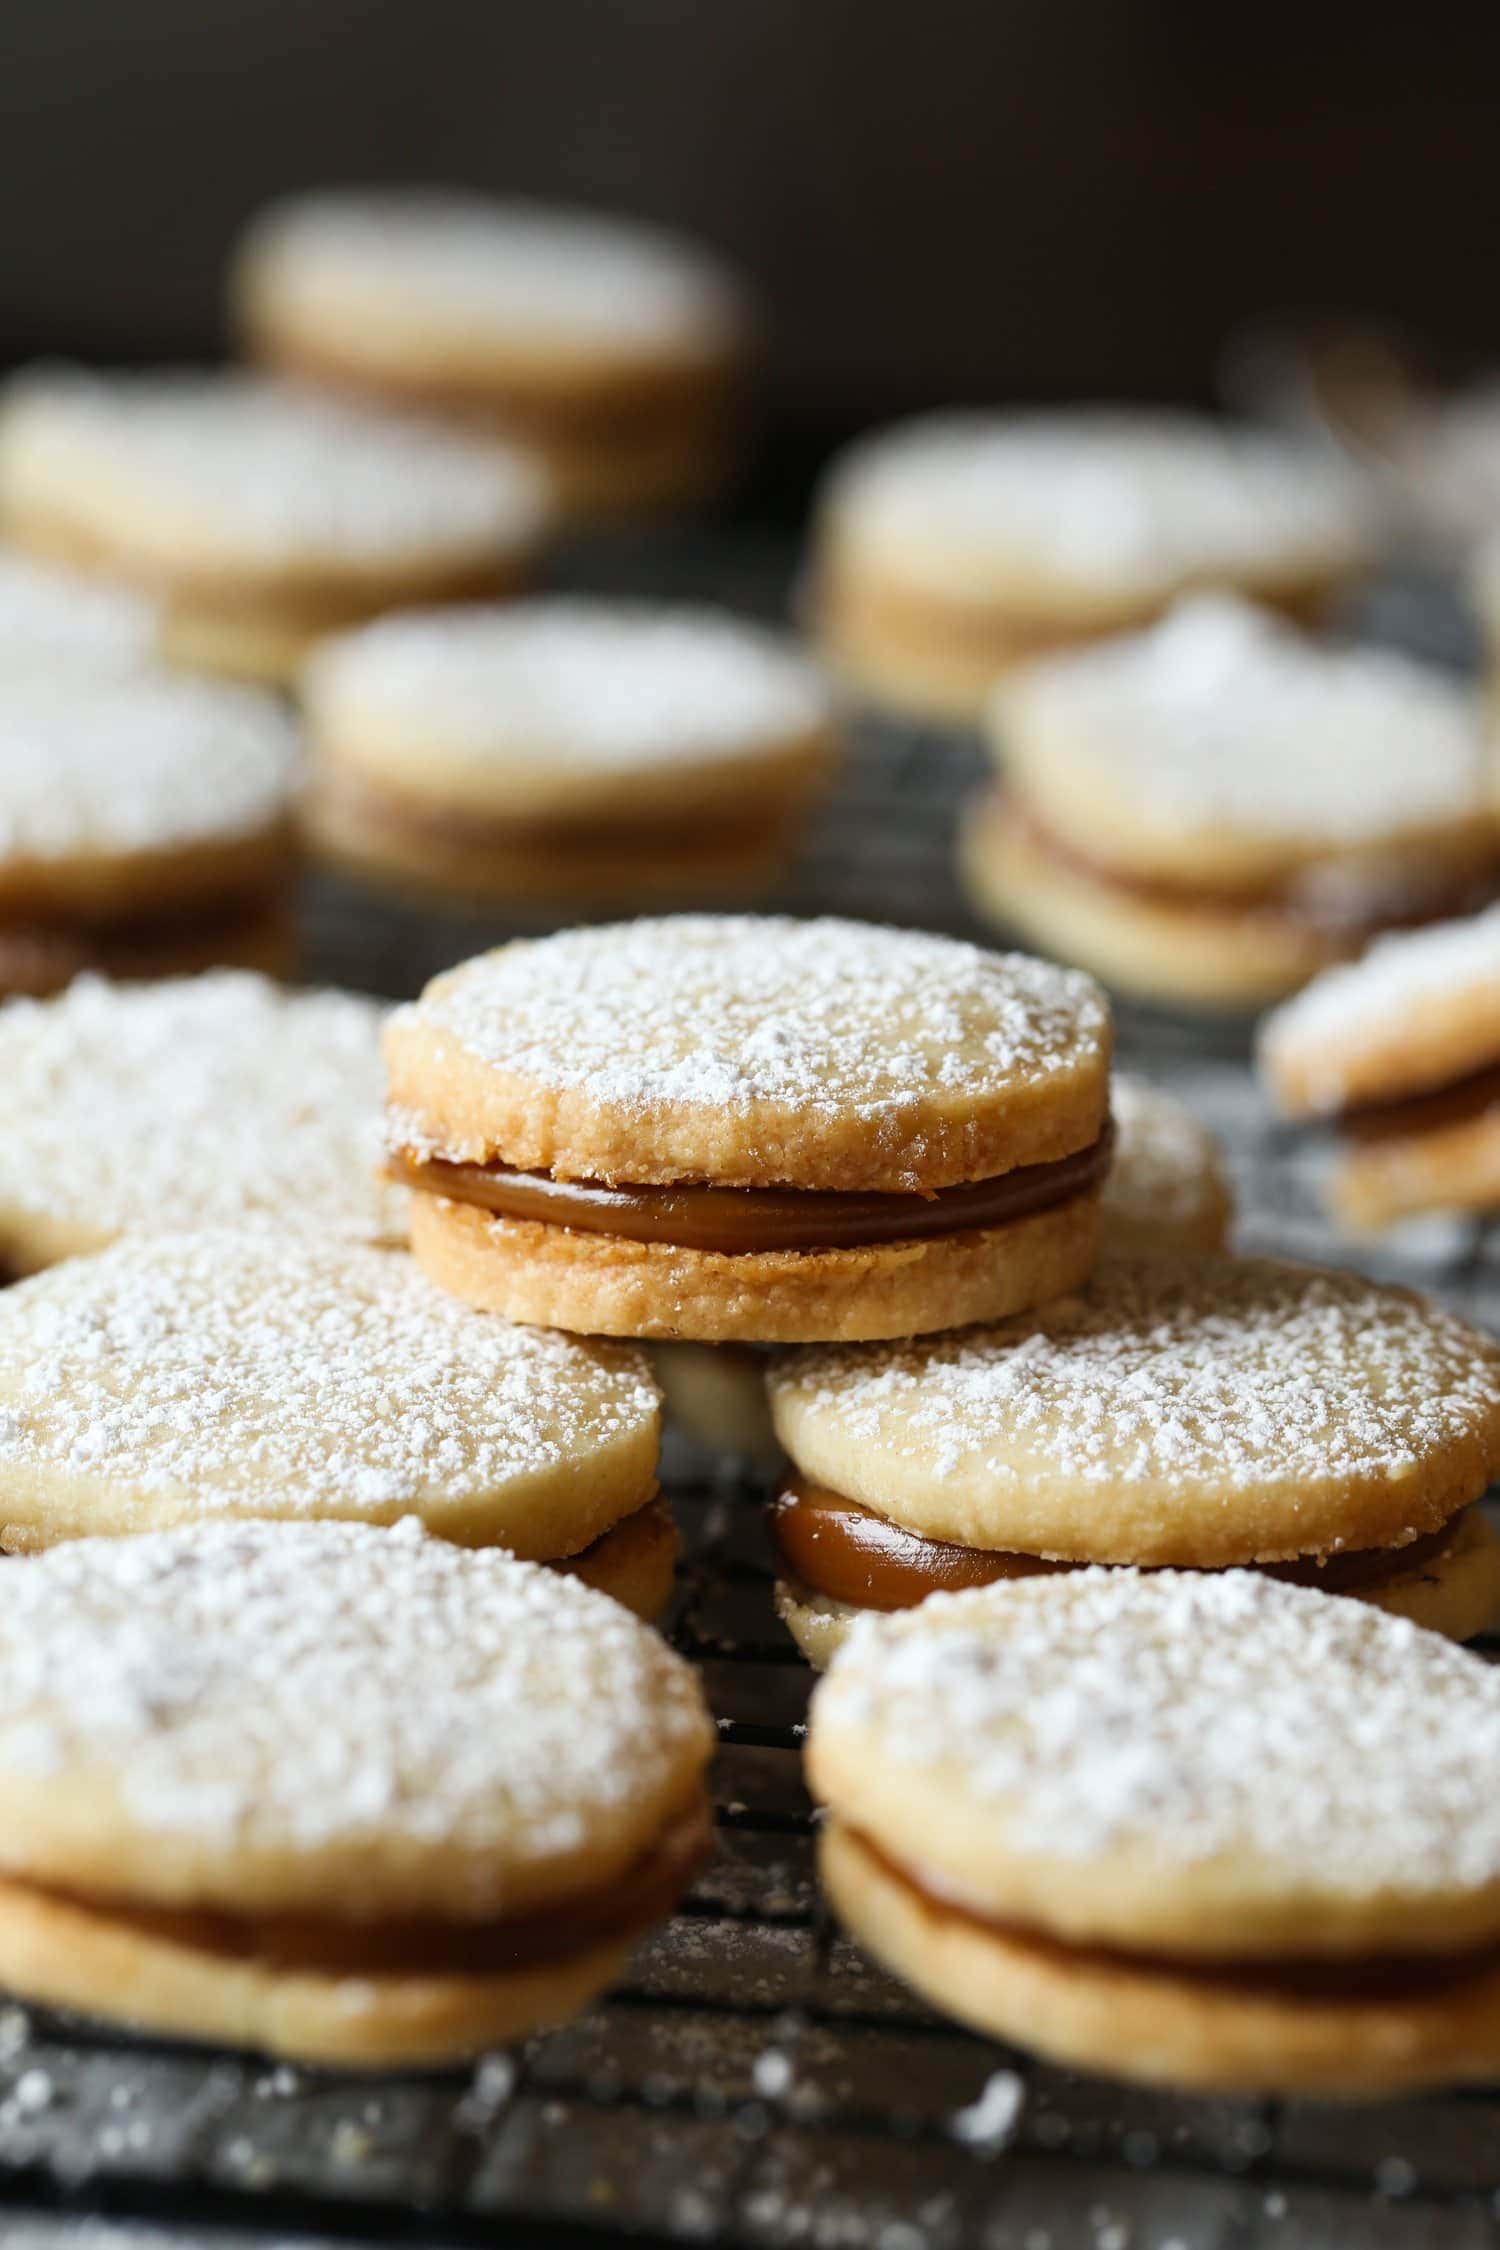 Alfajores cookies dusted with powdered sugar, filled with dulce de leche.